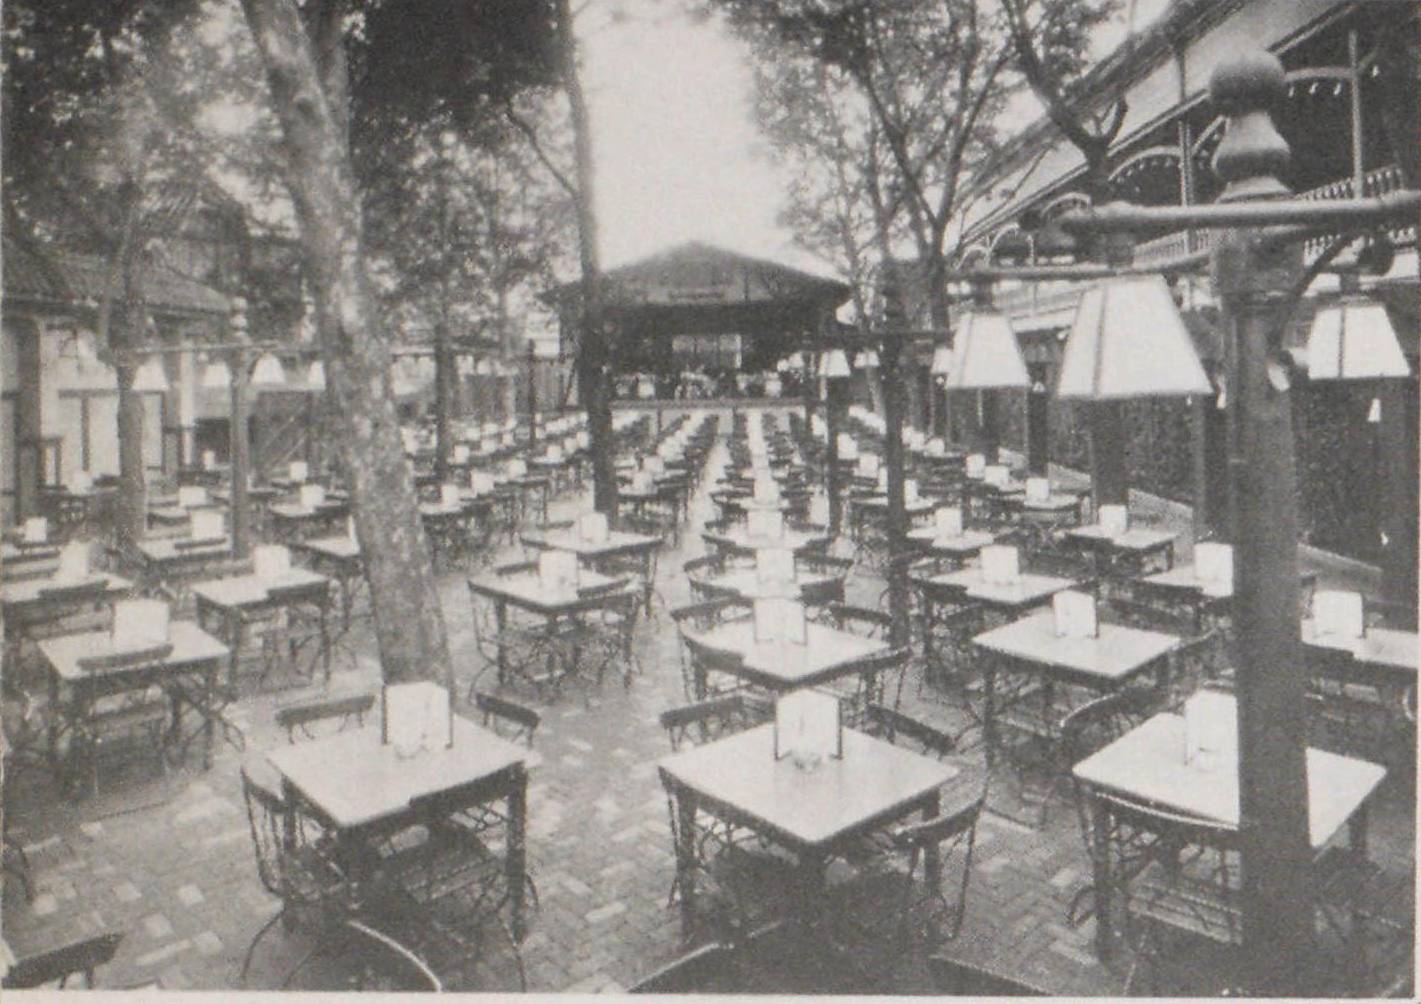 [Photograph of Feltman's - "the largest dining establishment in the world']